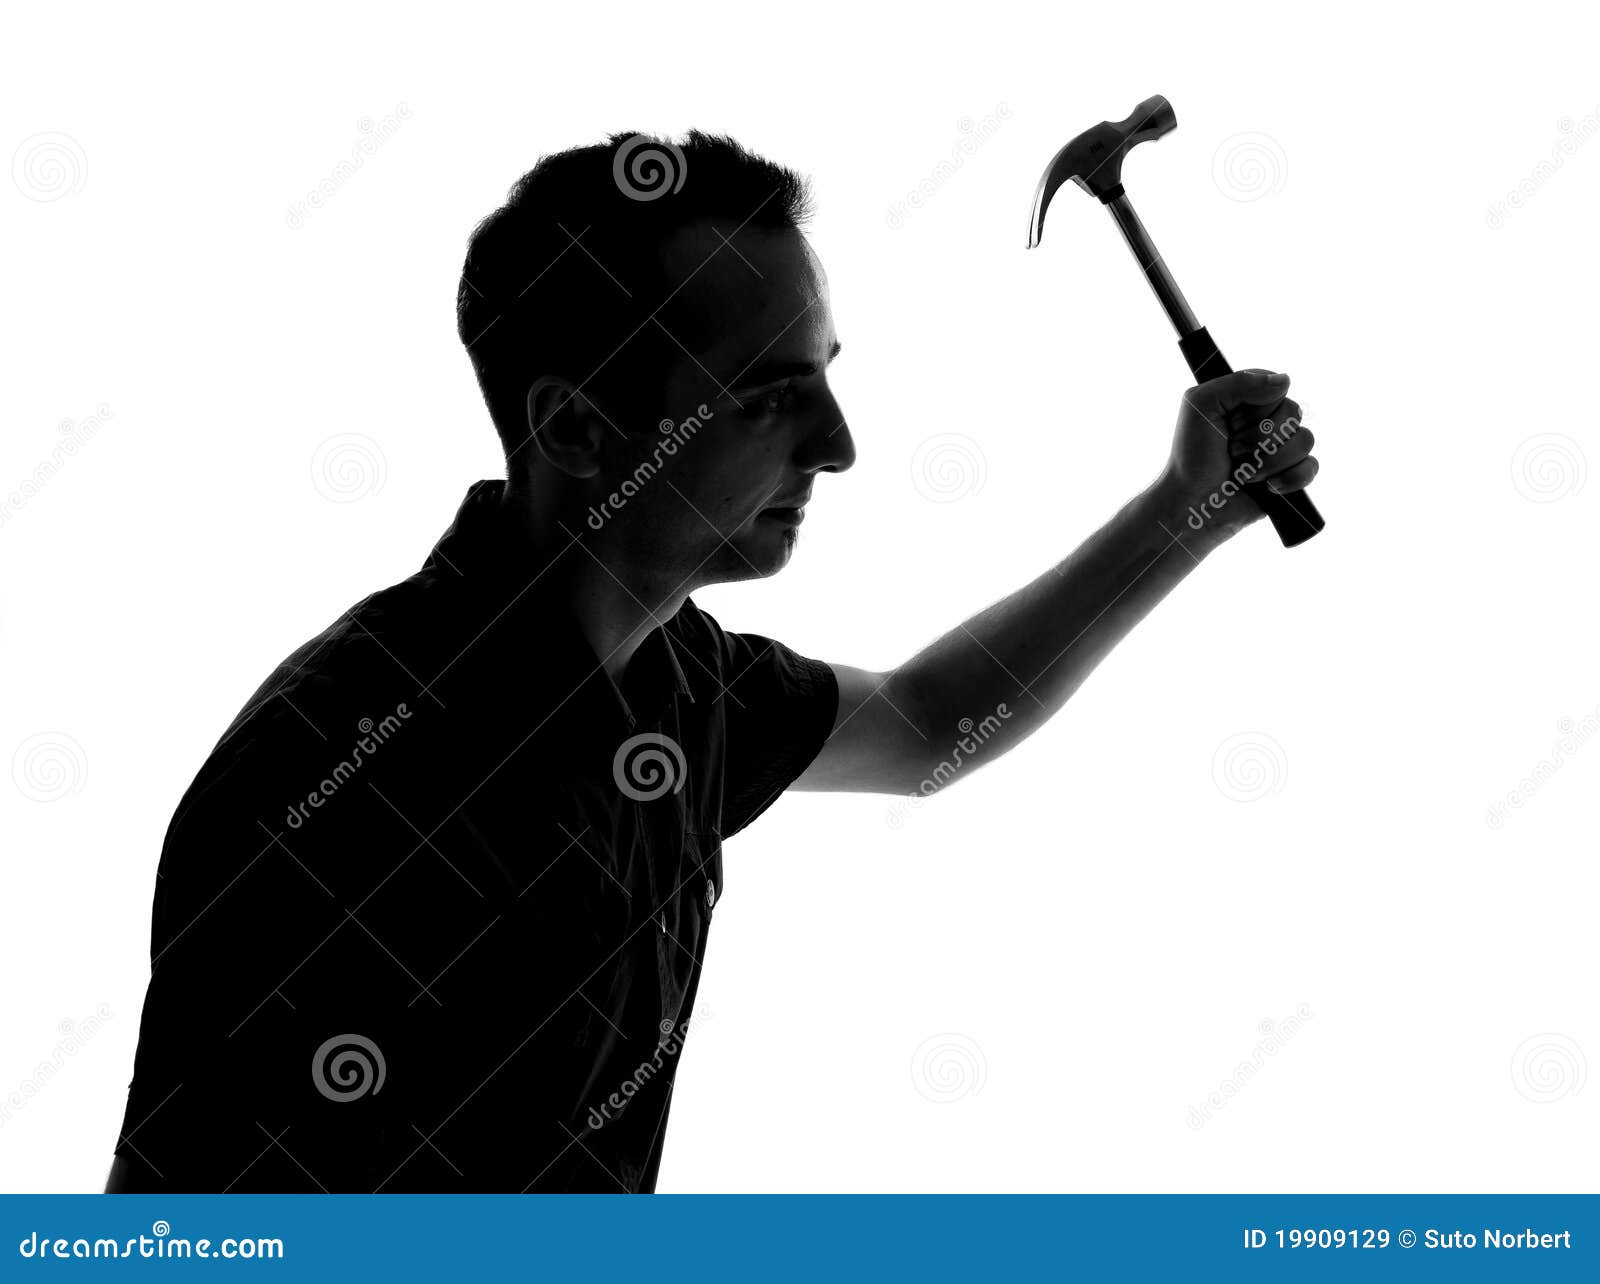 clipart man with hammer - photo #17